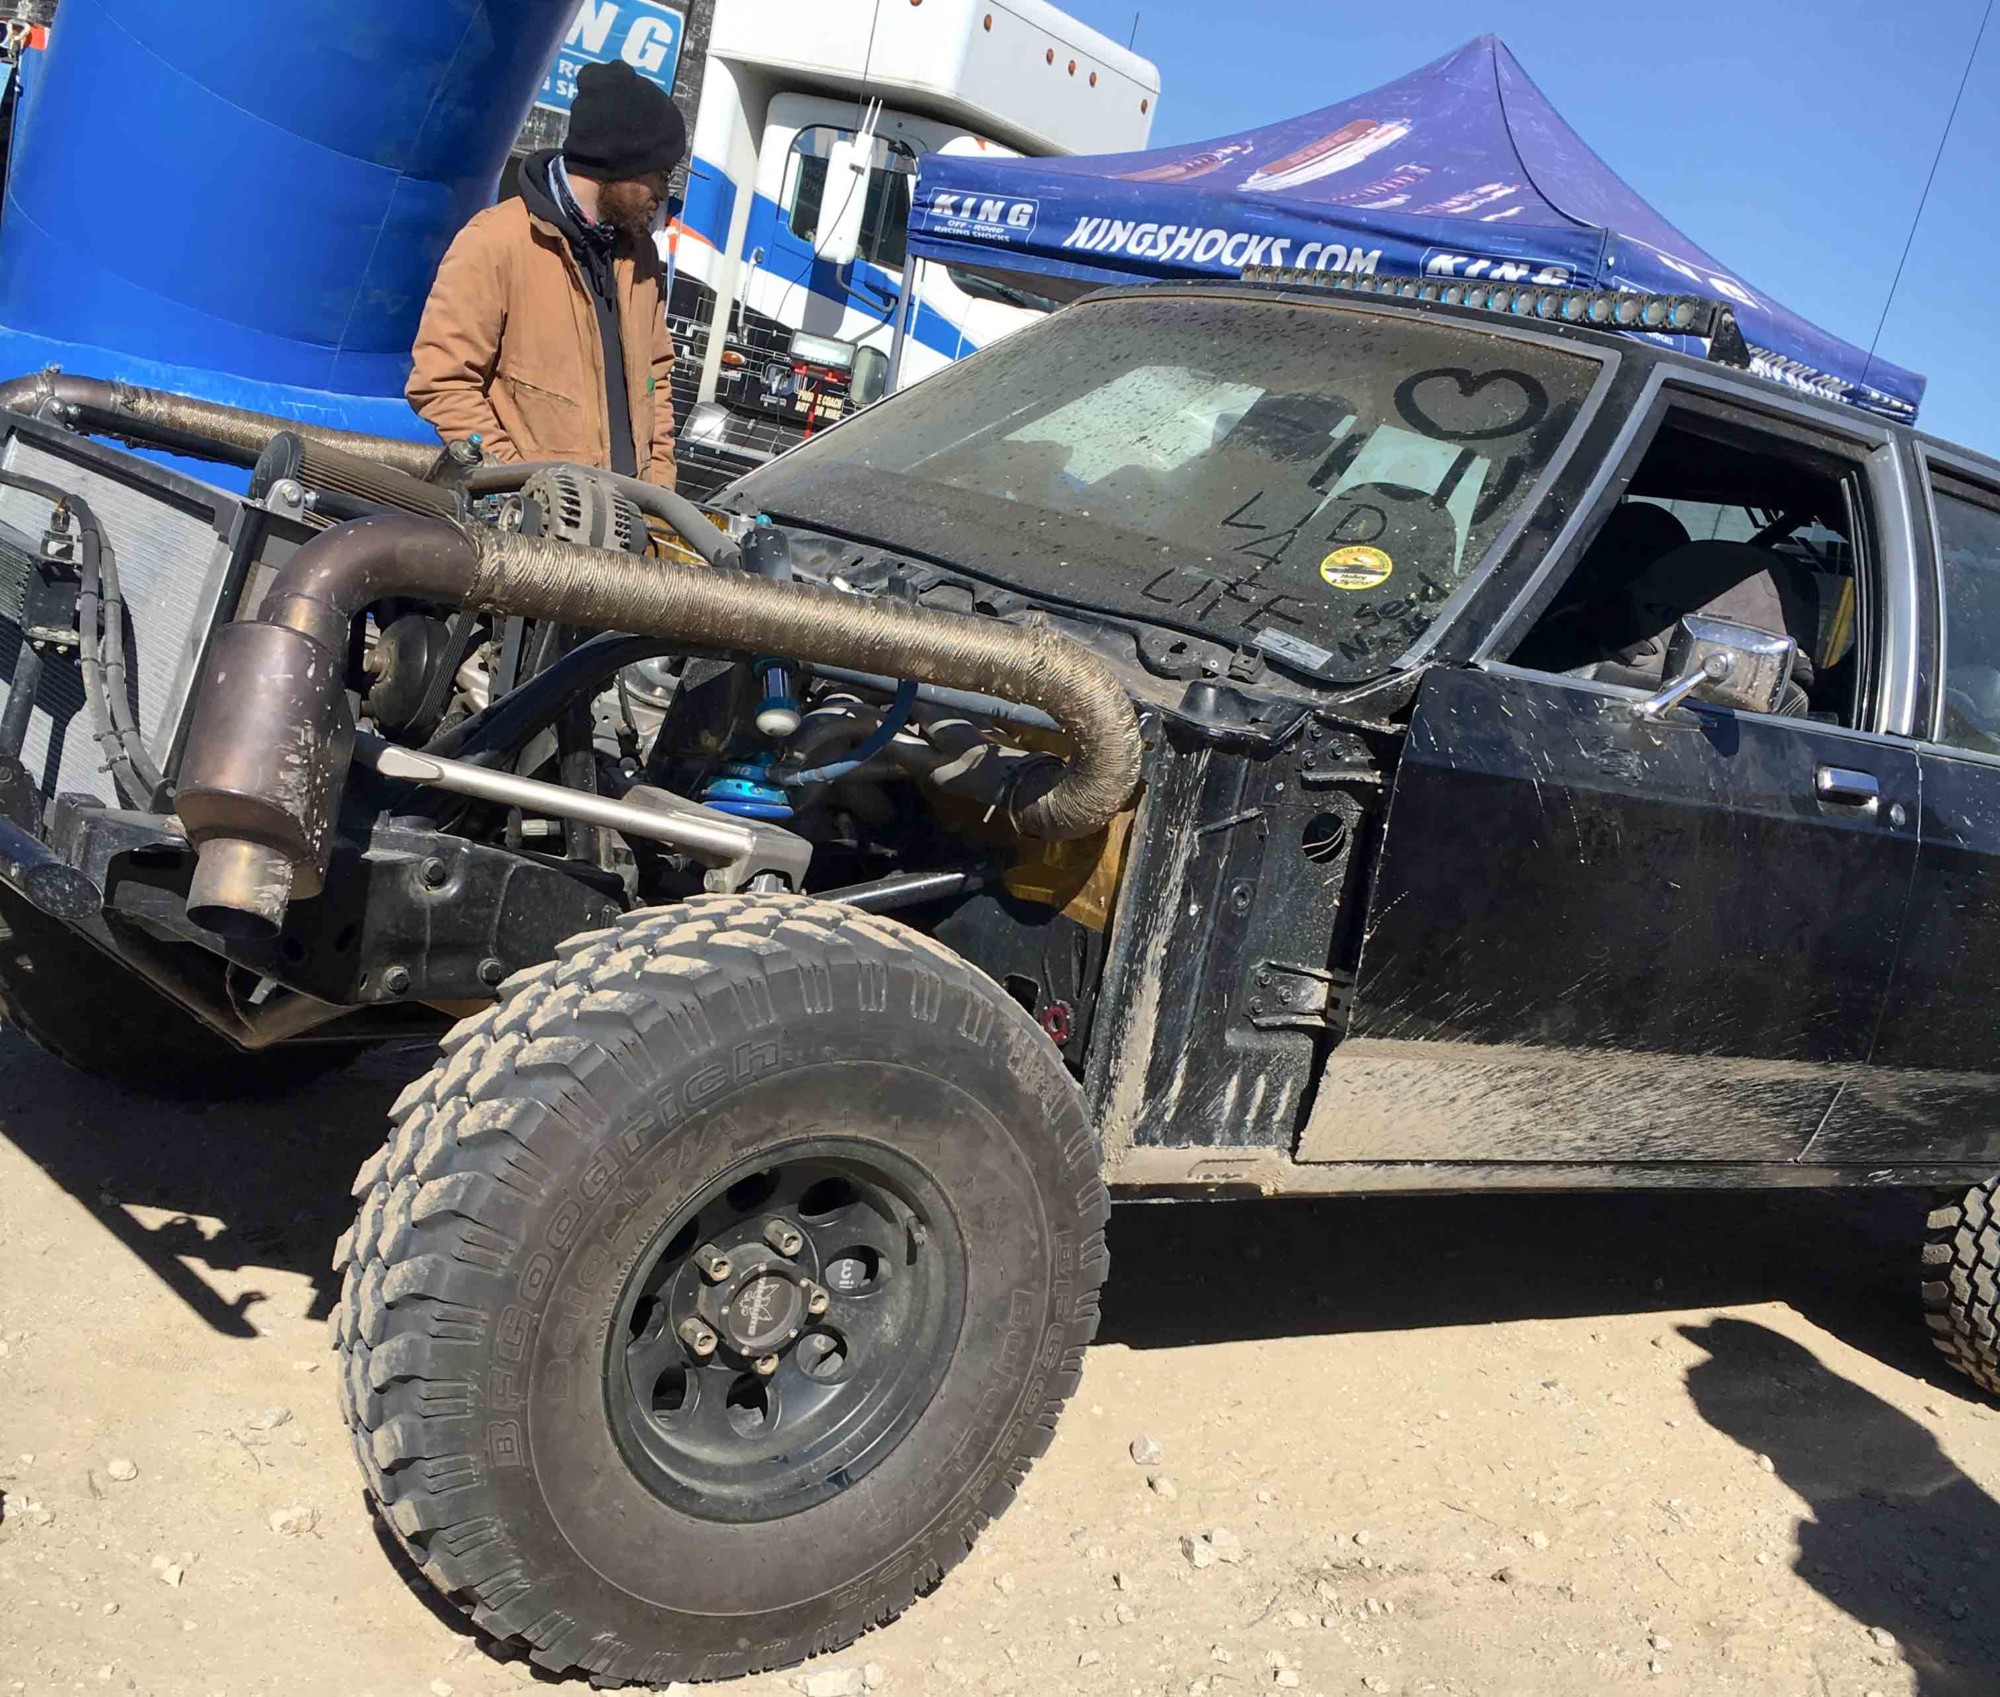 2019 King of hammers